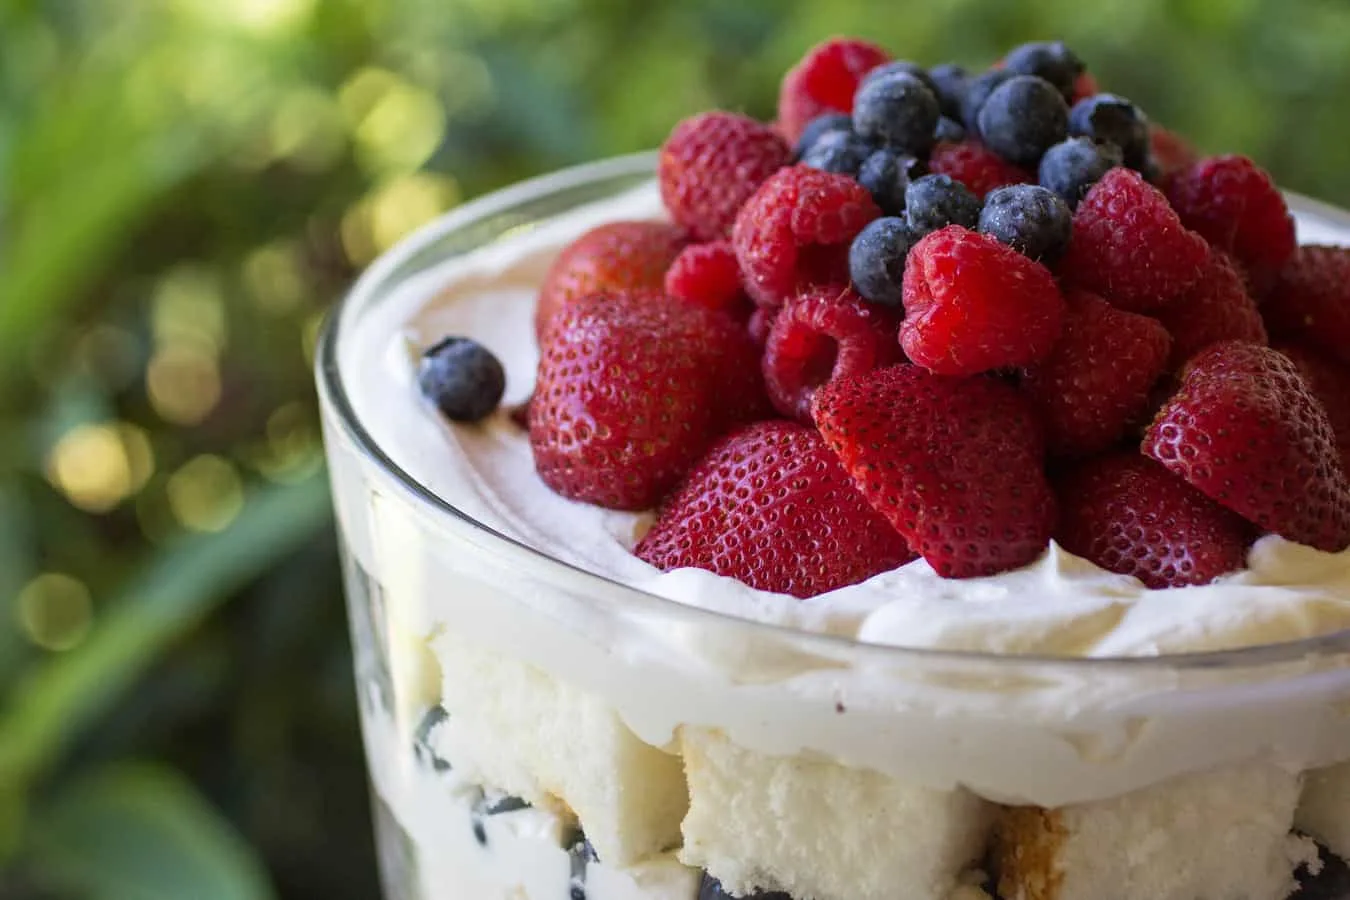 Amazing triple berry trifle with chambord and grand marnier in the whipped cream!